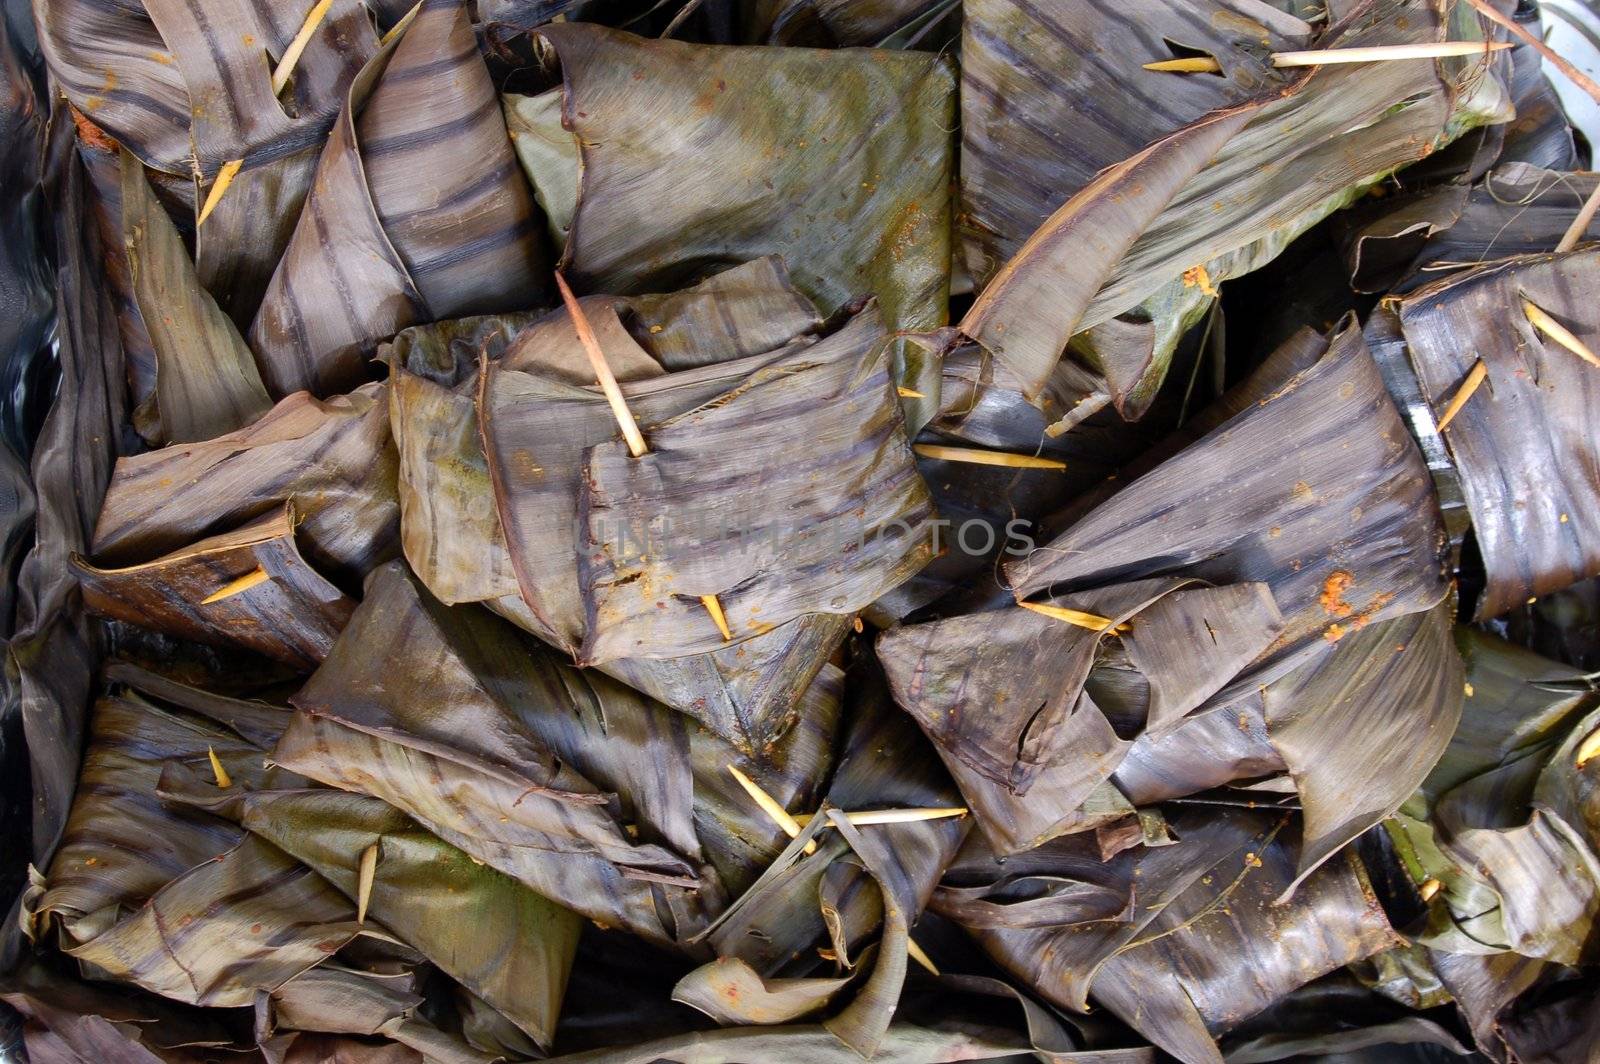 fish cooked in herbs and spices and served in leaf wraps